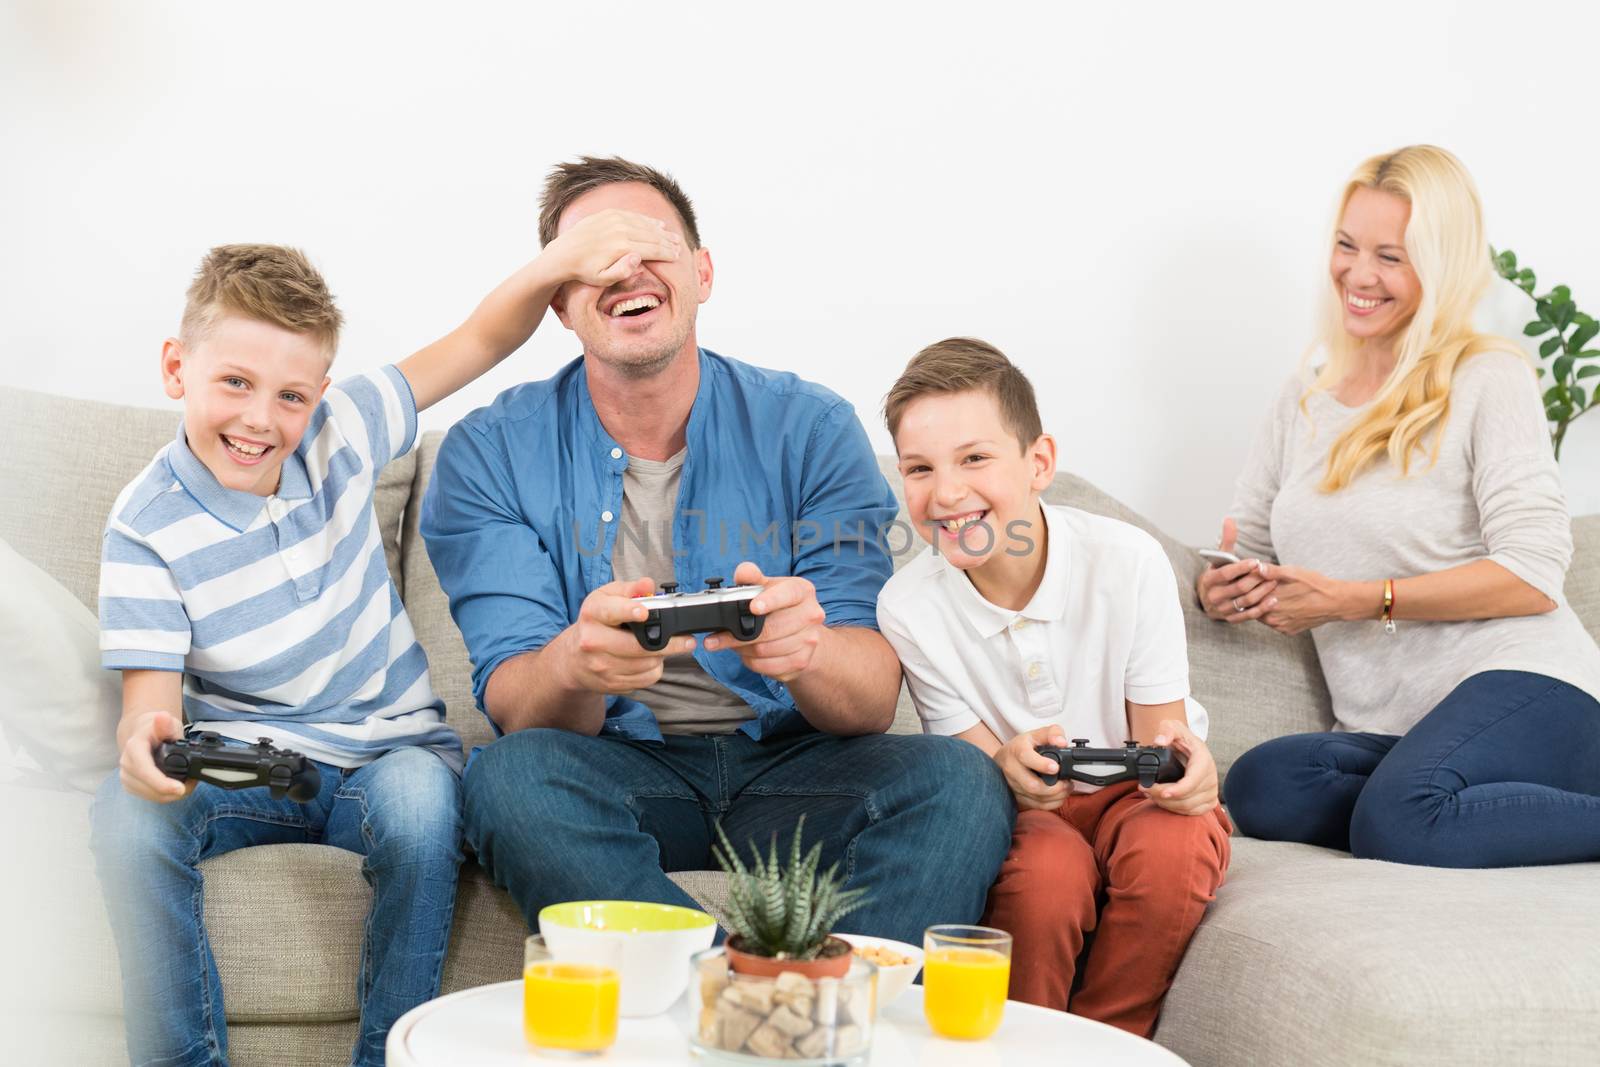 Happy young family playing videogame console on TV. Spending quality leisure time with children and family concept. Gaming consoles are generic and debranded.